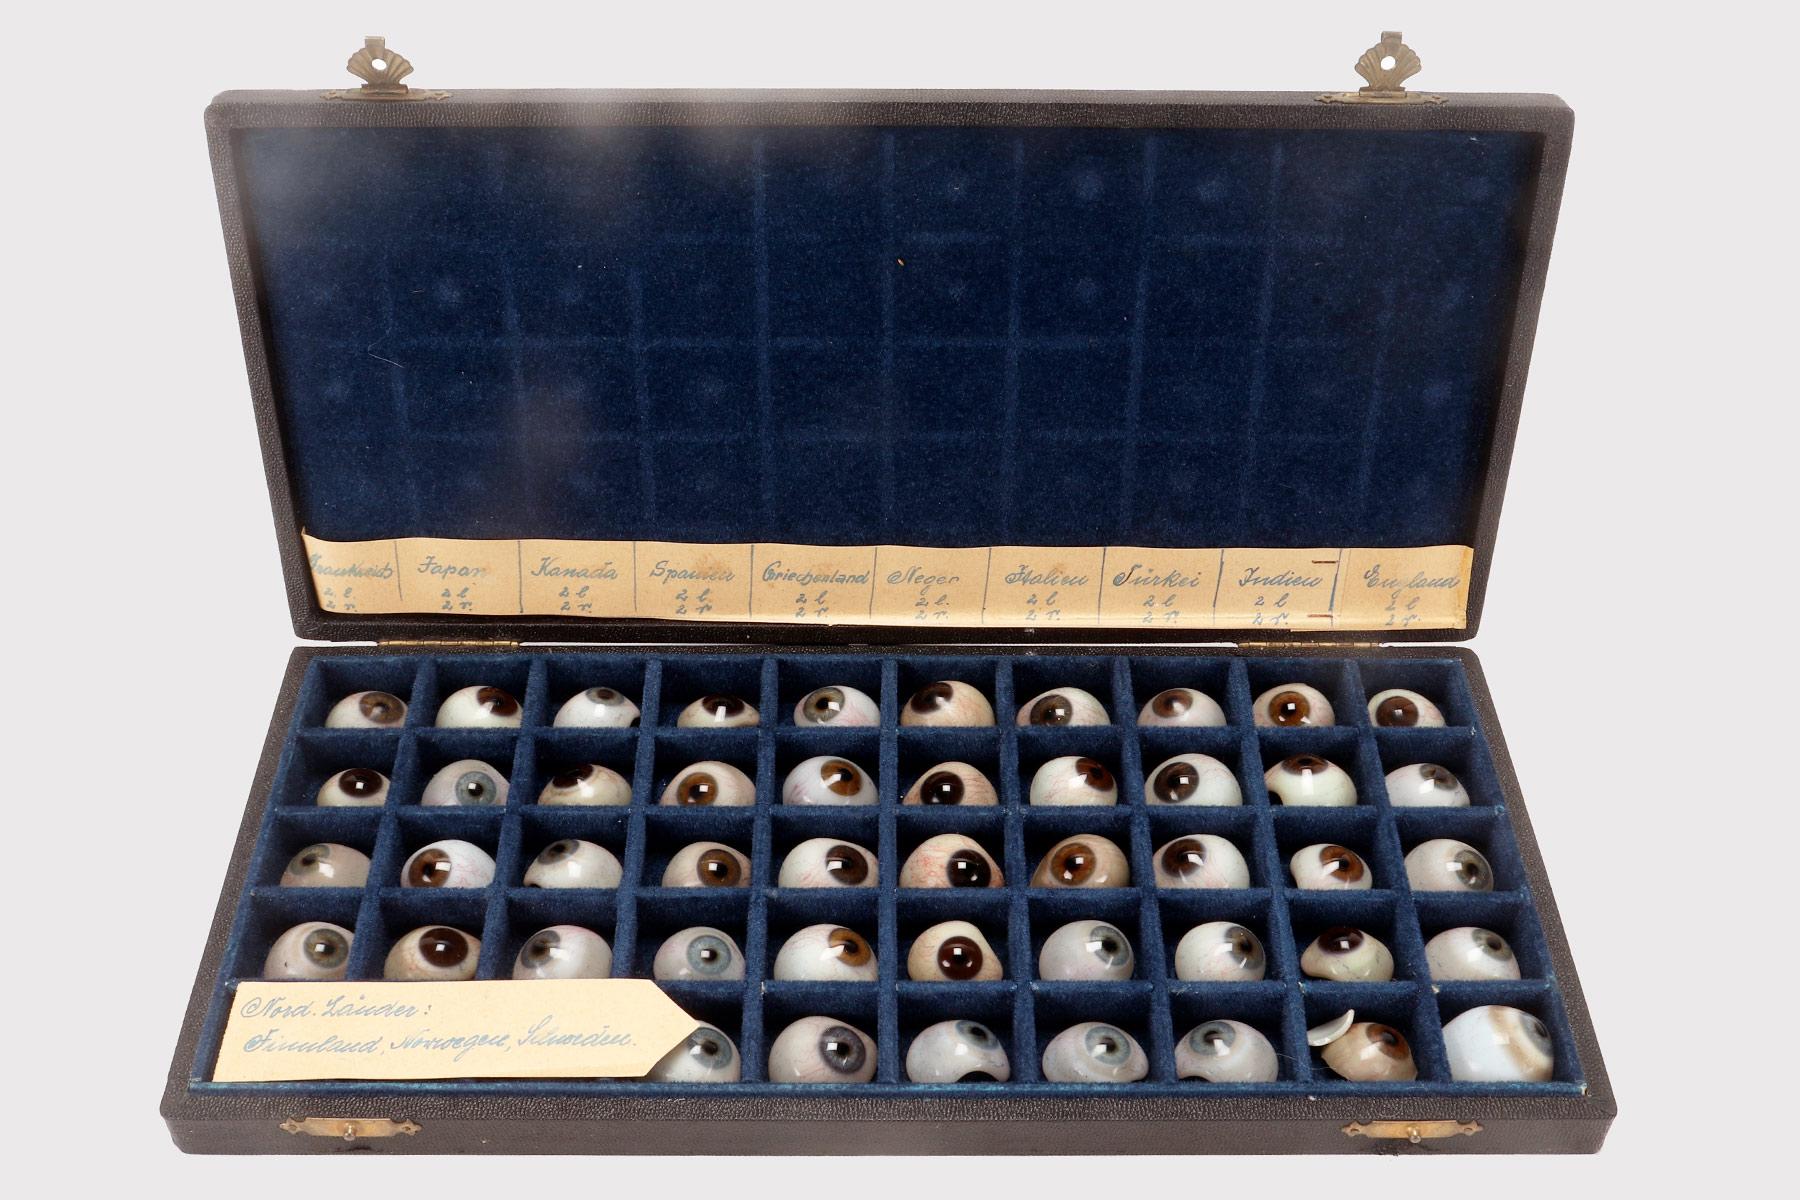 An amazing antique set of 50 glass prosthetic eyes. Maximum quality and refined details with a great variability of models. In their original, wooden case, lined with black grained leather, the additional feature are the paper labels: name of